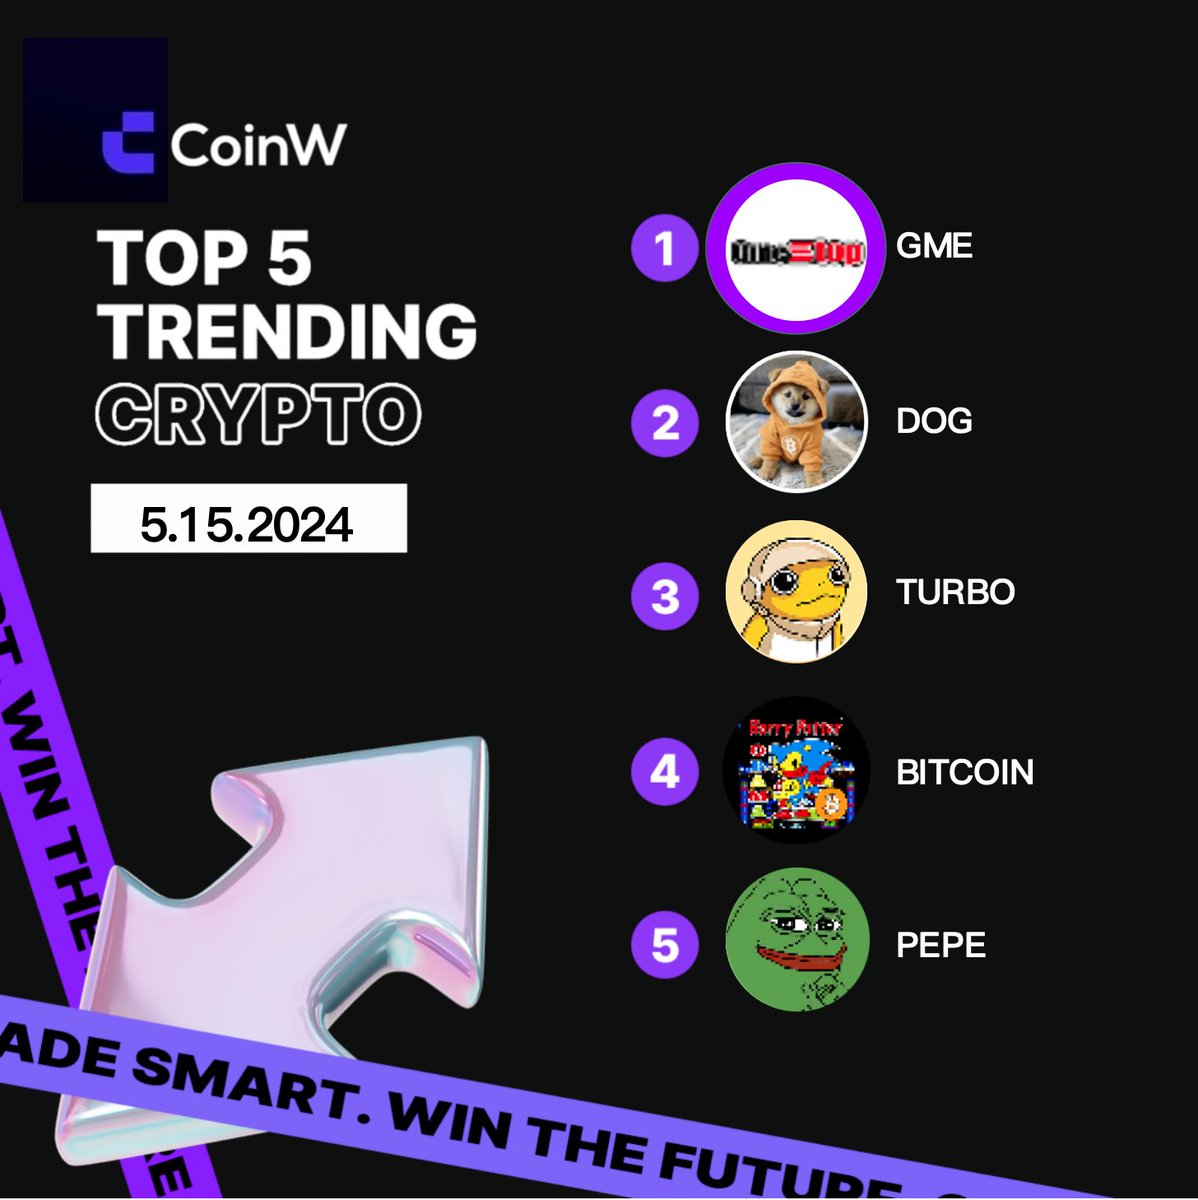 Our Top 5 Trending #Crypto chart: $GME, $DOG, $TURBO, $BITCOIN, and $PEPE are making waves! 🌊 What's on your trading radar today? Share your picks! 👇